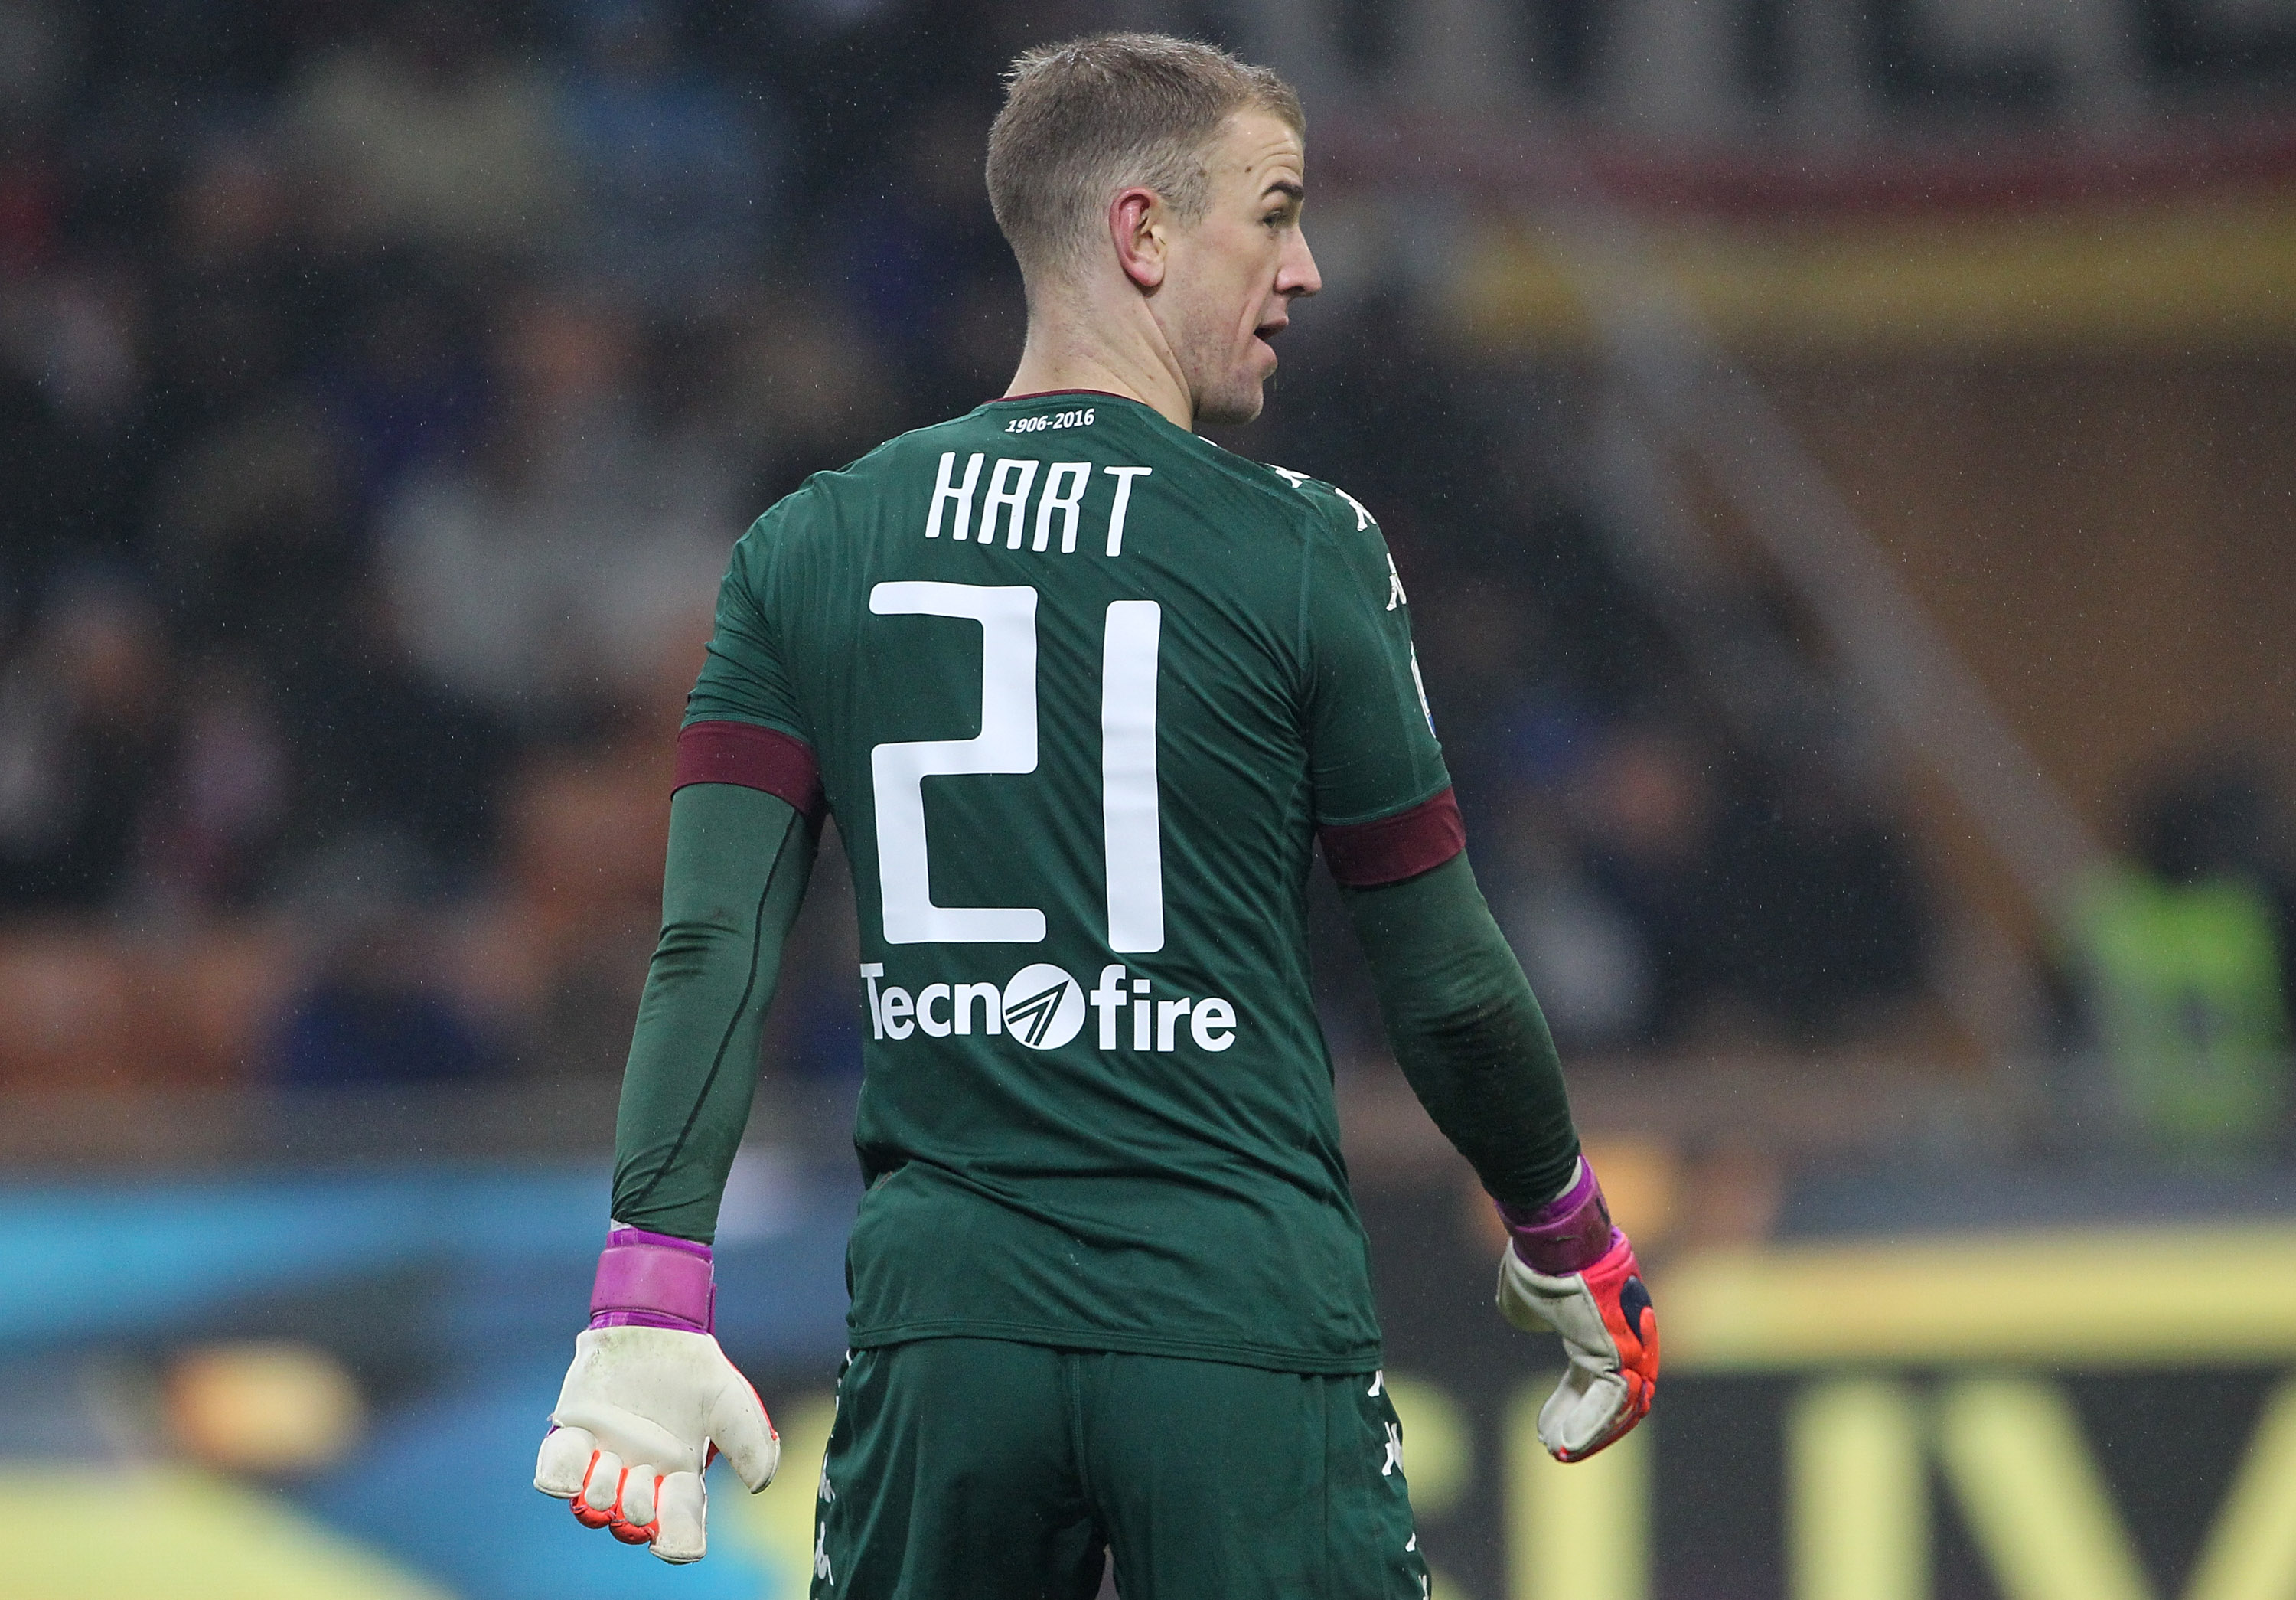 MILAN, ITALY - JANUARY 12:  Joe Hart of Torino FC looks on during the TIM Cup match between AC Milan and AC Torino at Giuseppe Meazza Stadium on January 12, 2017 in Milan, Italy.  (Photo by Marco Luzzani/Getty Images)